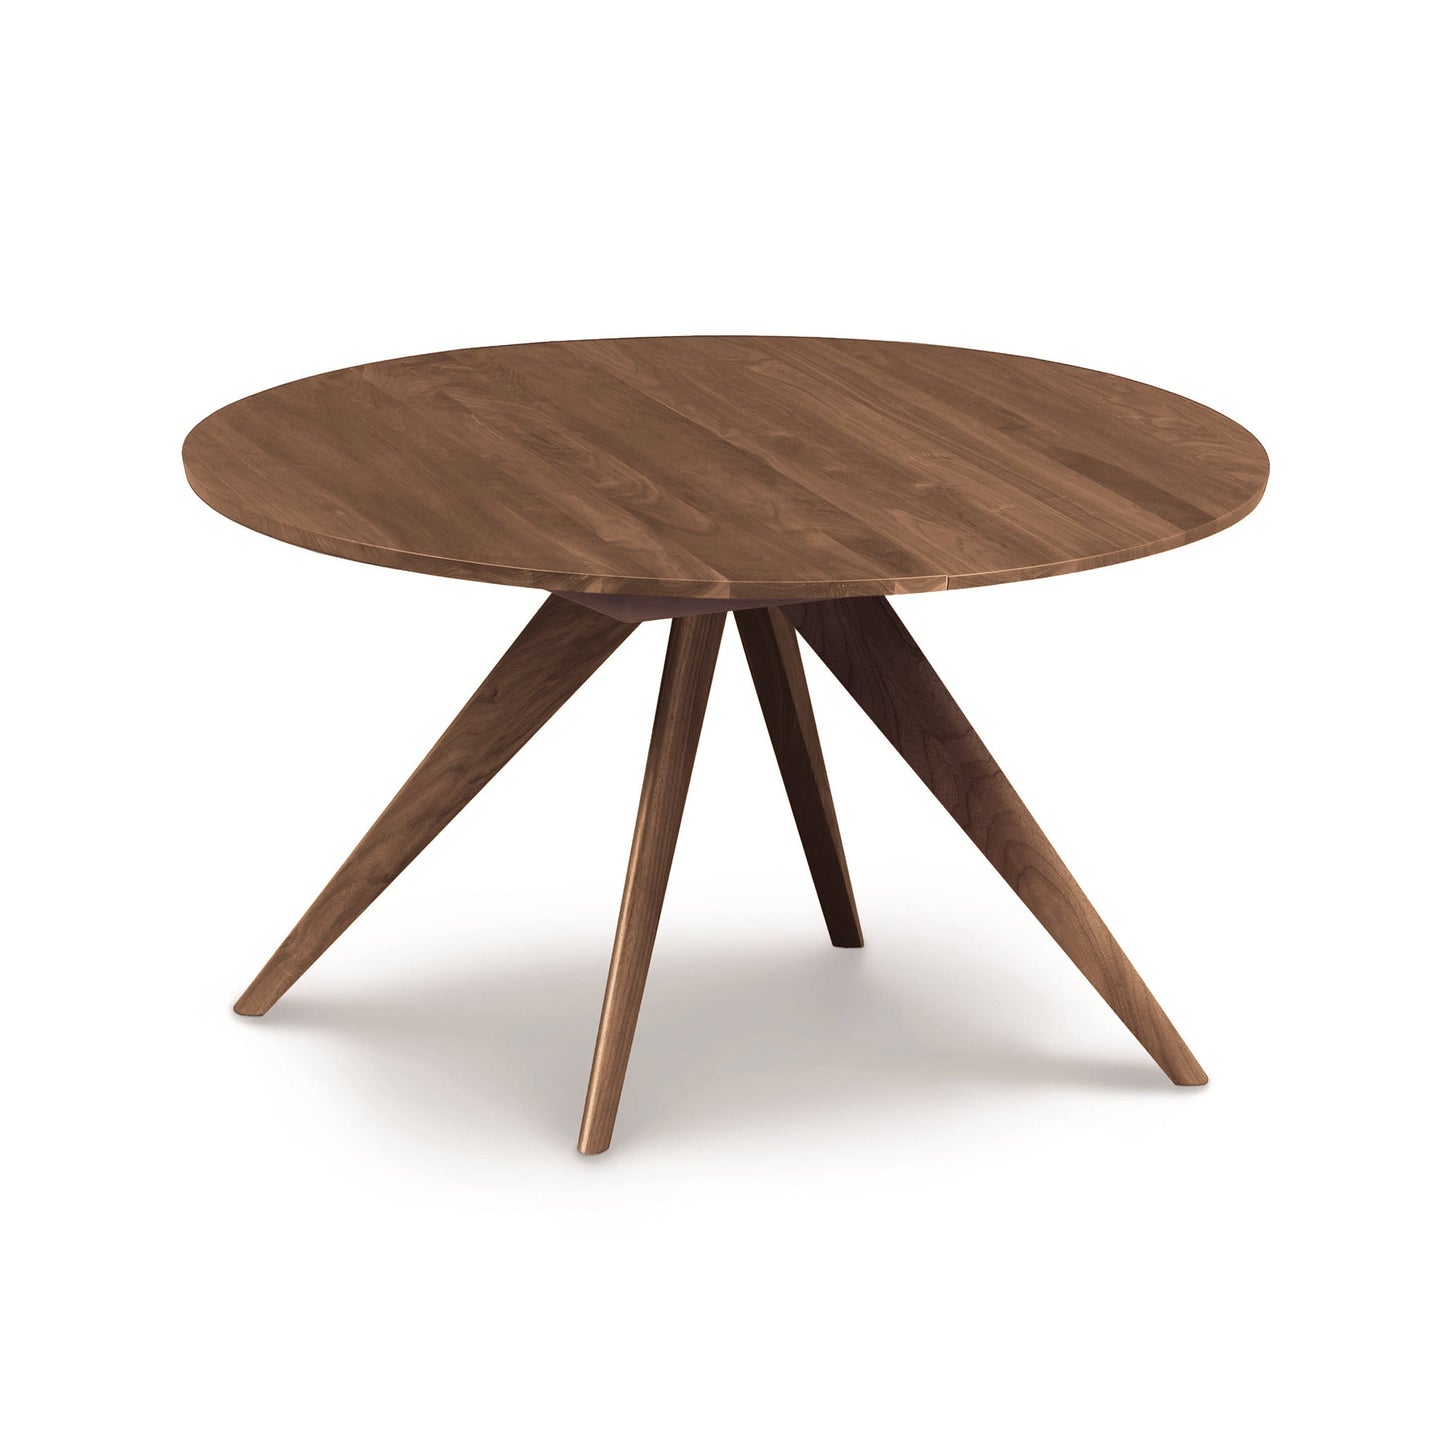 A round wooden table with three legs on a white background.